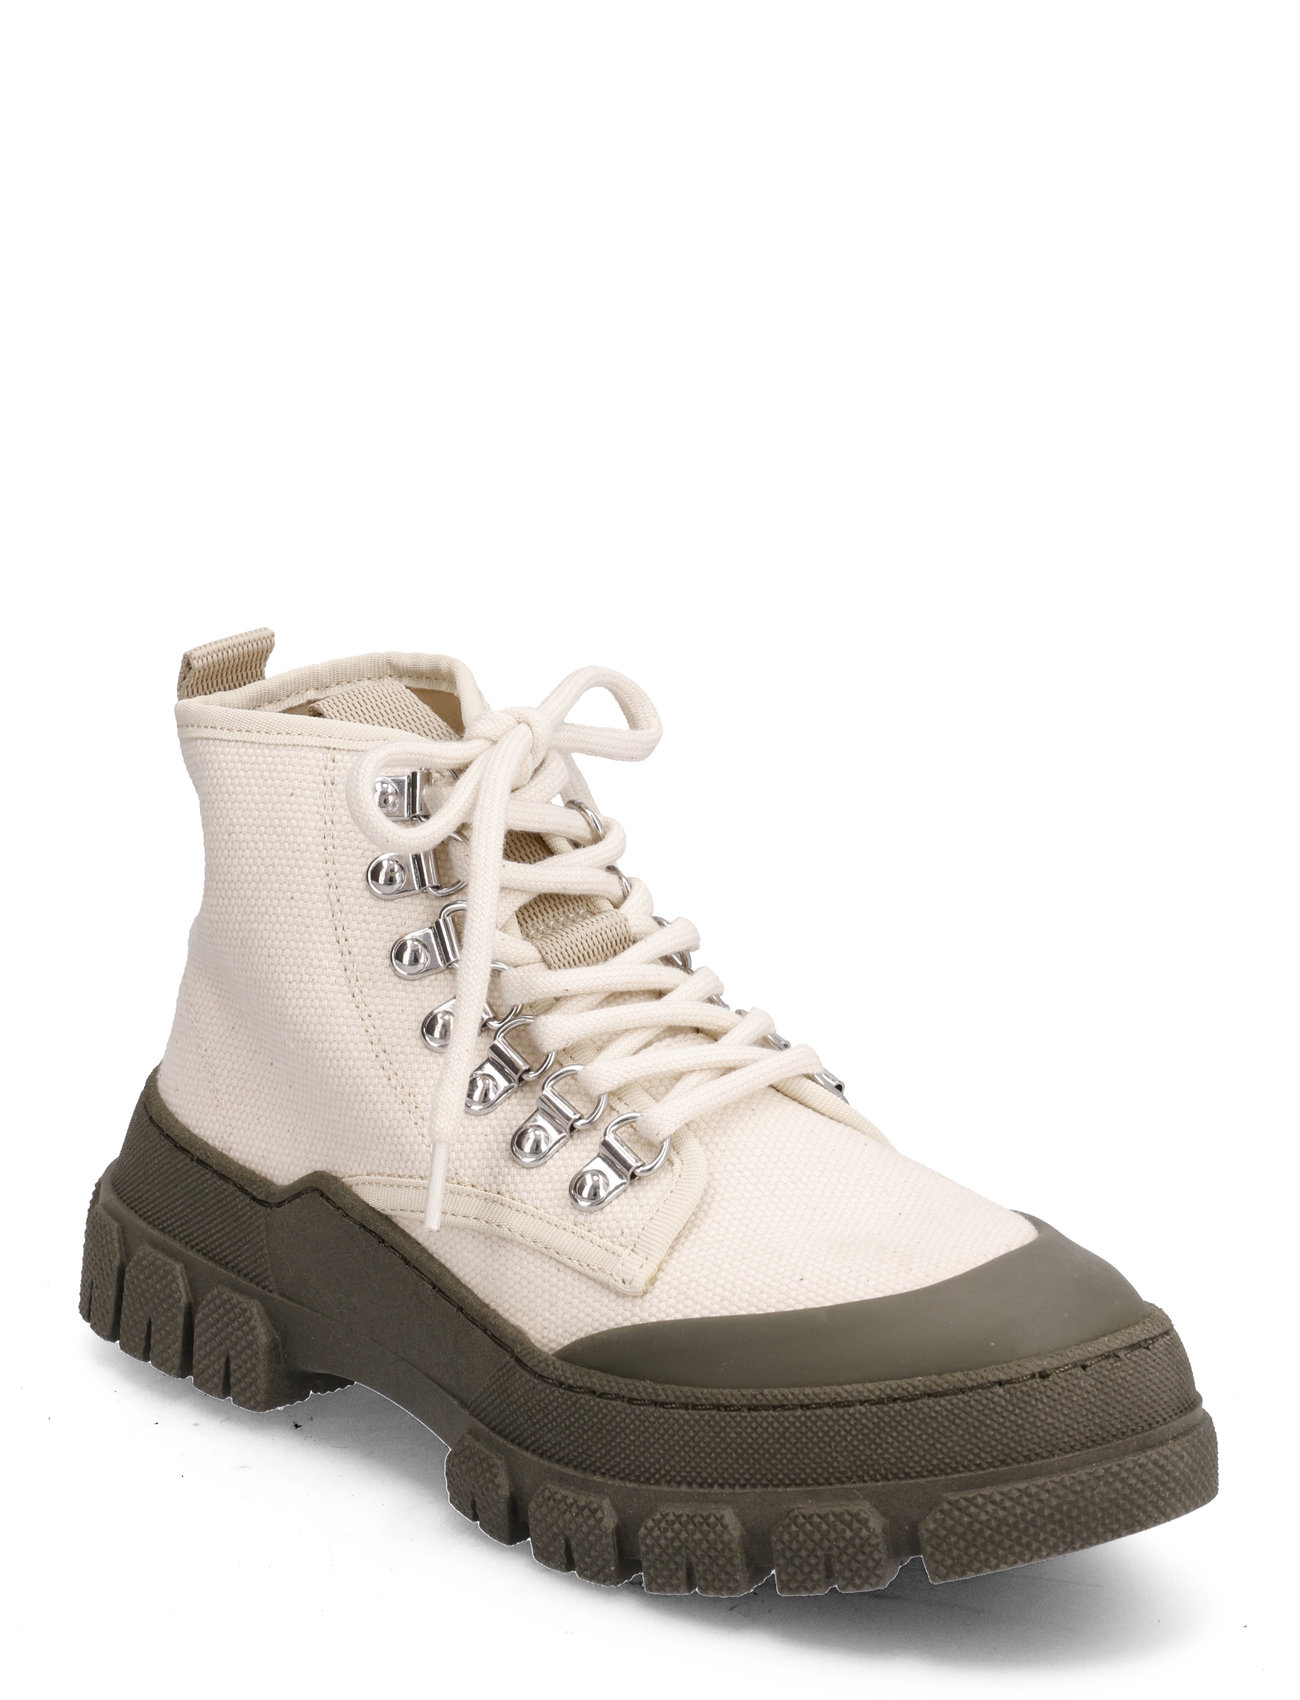 Twig High - Off White / Army Shoes Boots Ankle Boots Laced Boots White Garment Project